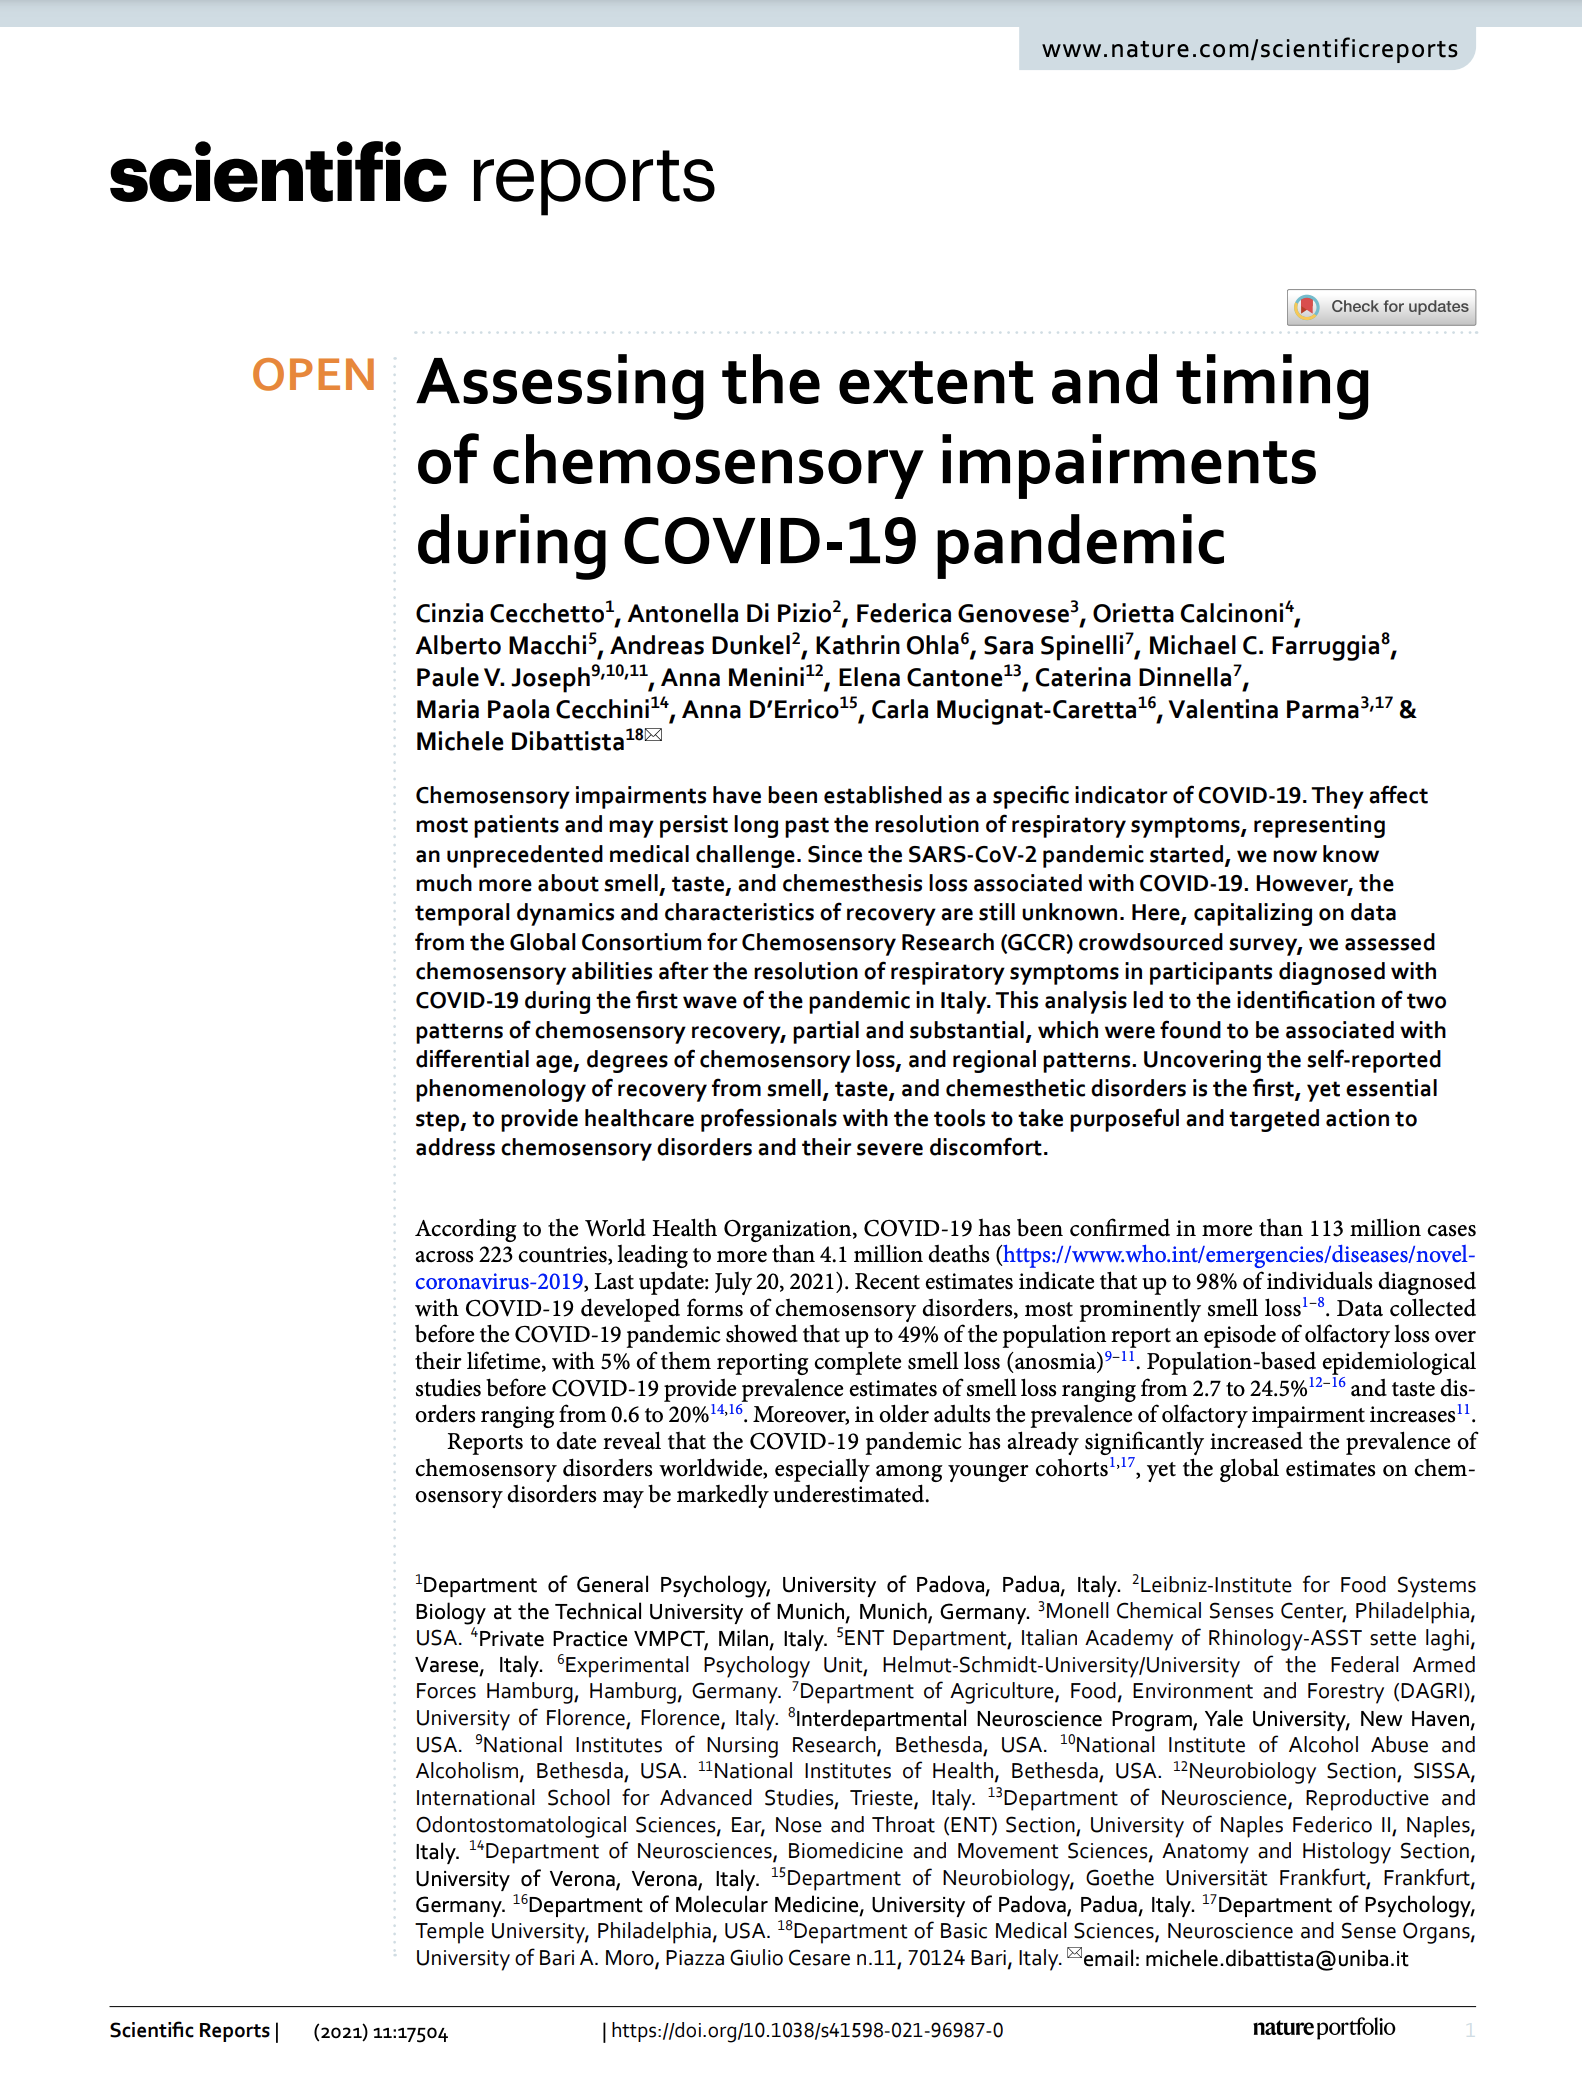 Assessing the extent and timing of chemosensory impairments during COVID-19 pandemic